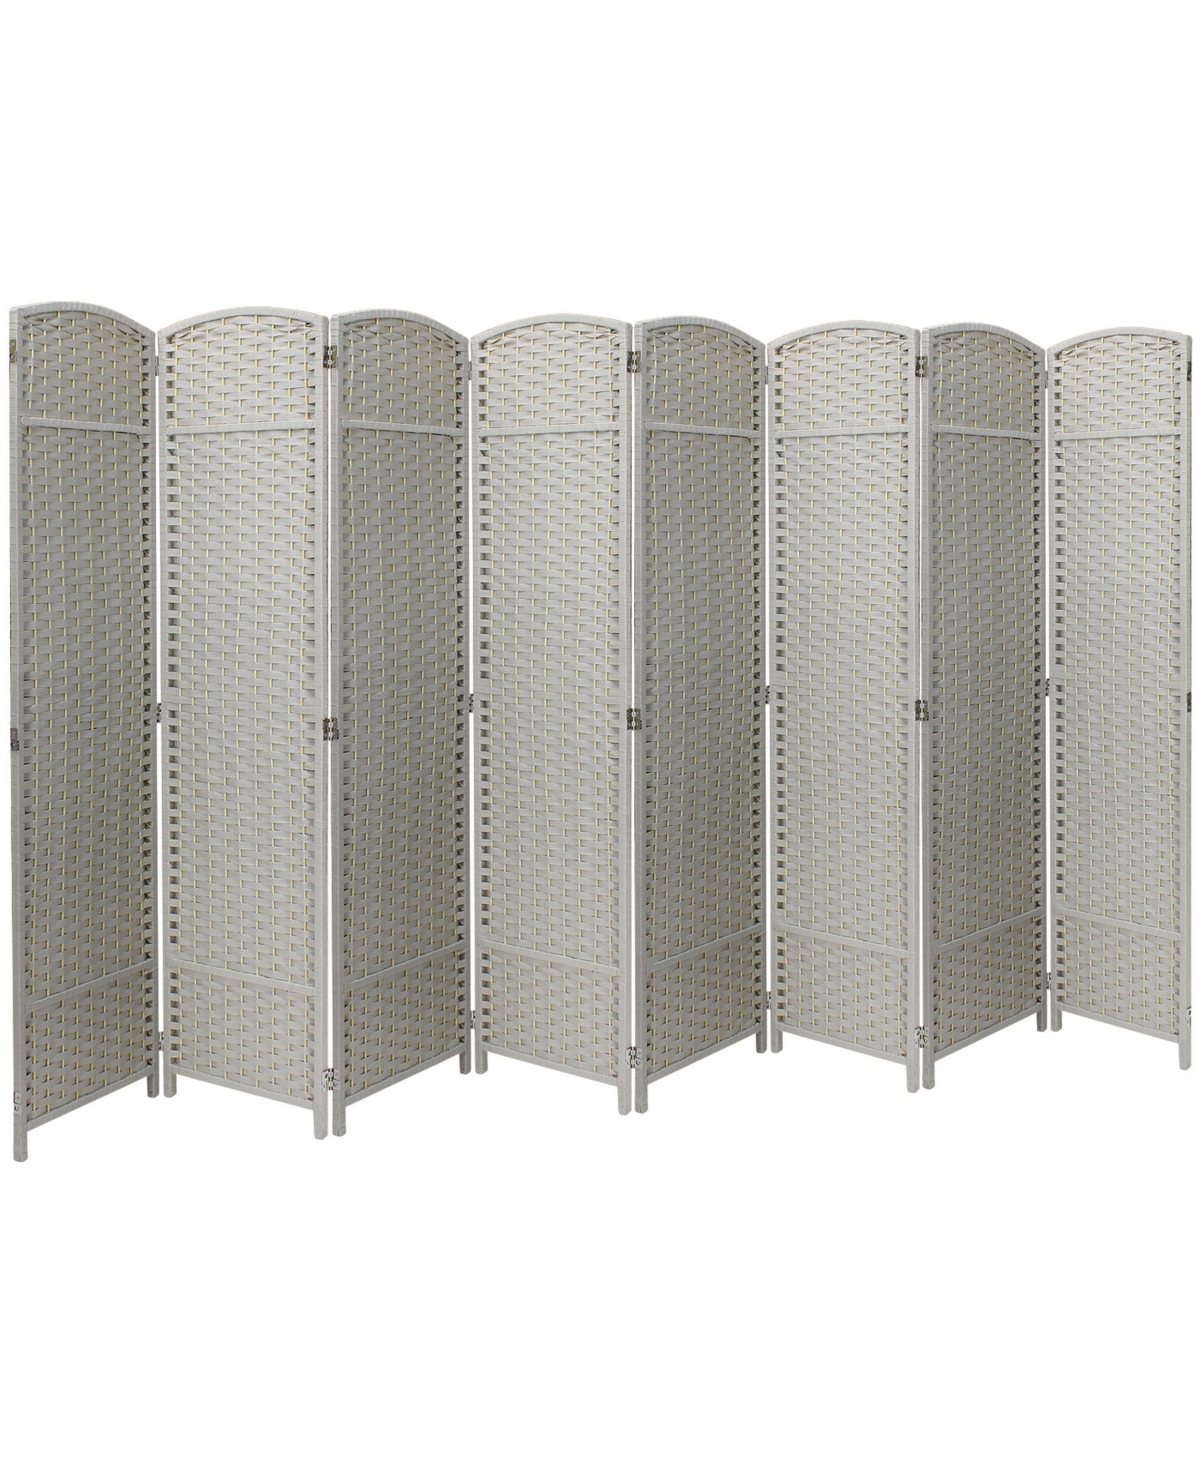 8-Panel Room Divider Privacy Screen - Beige